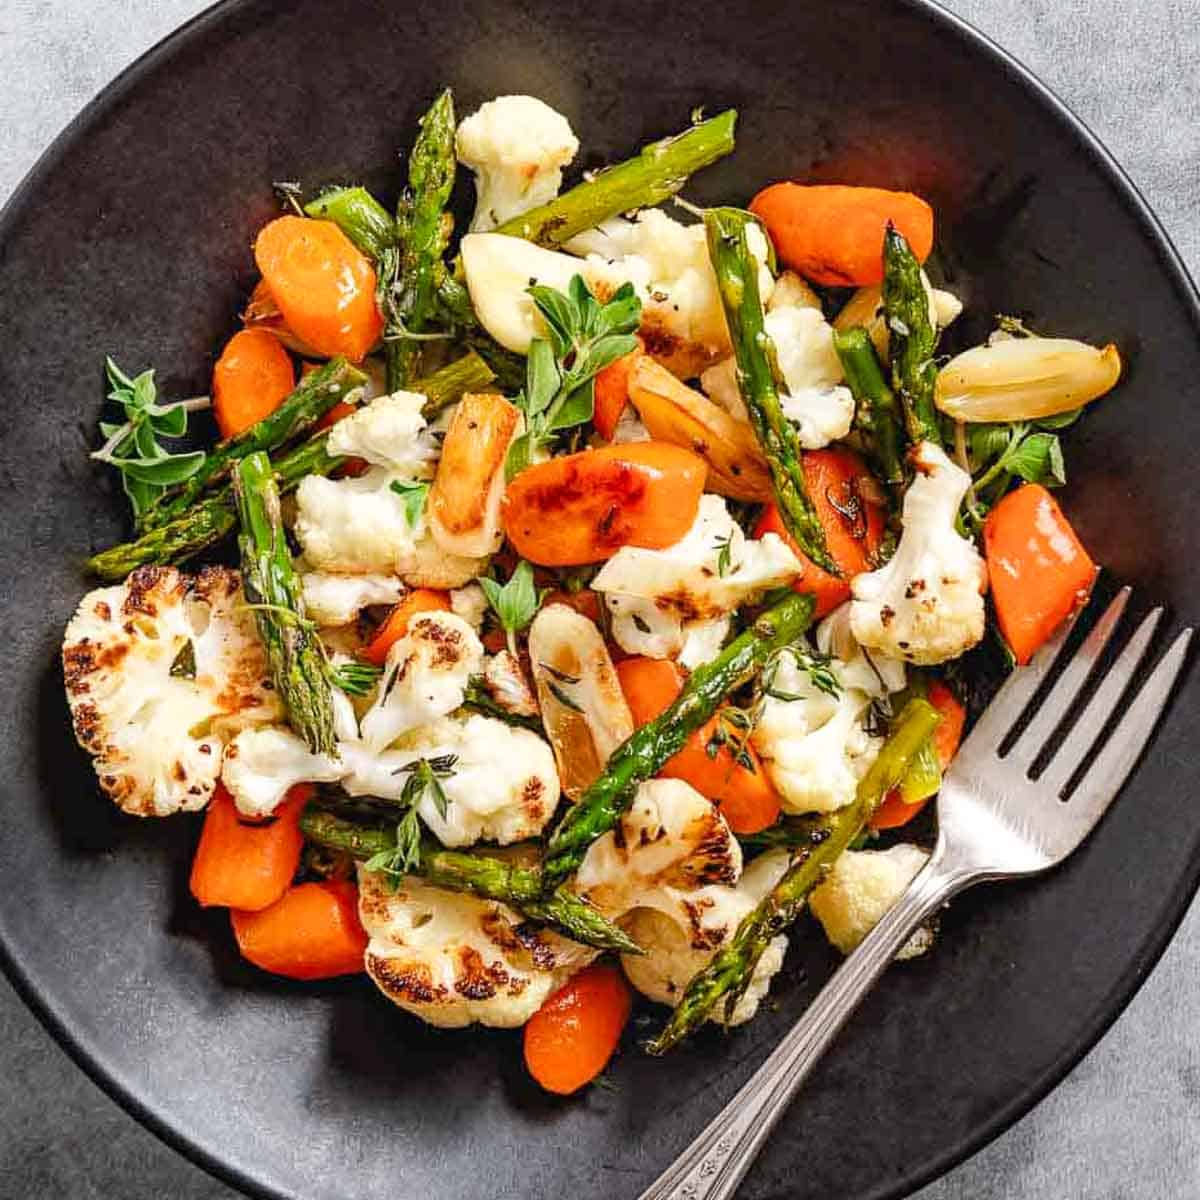 Roasted cauliflower with carrots and asparagus and garlic cloves.